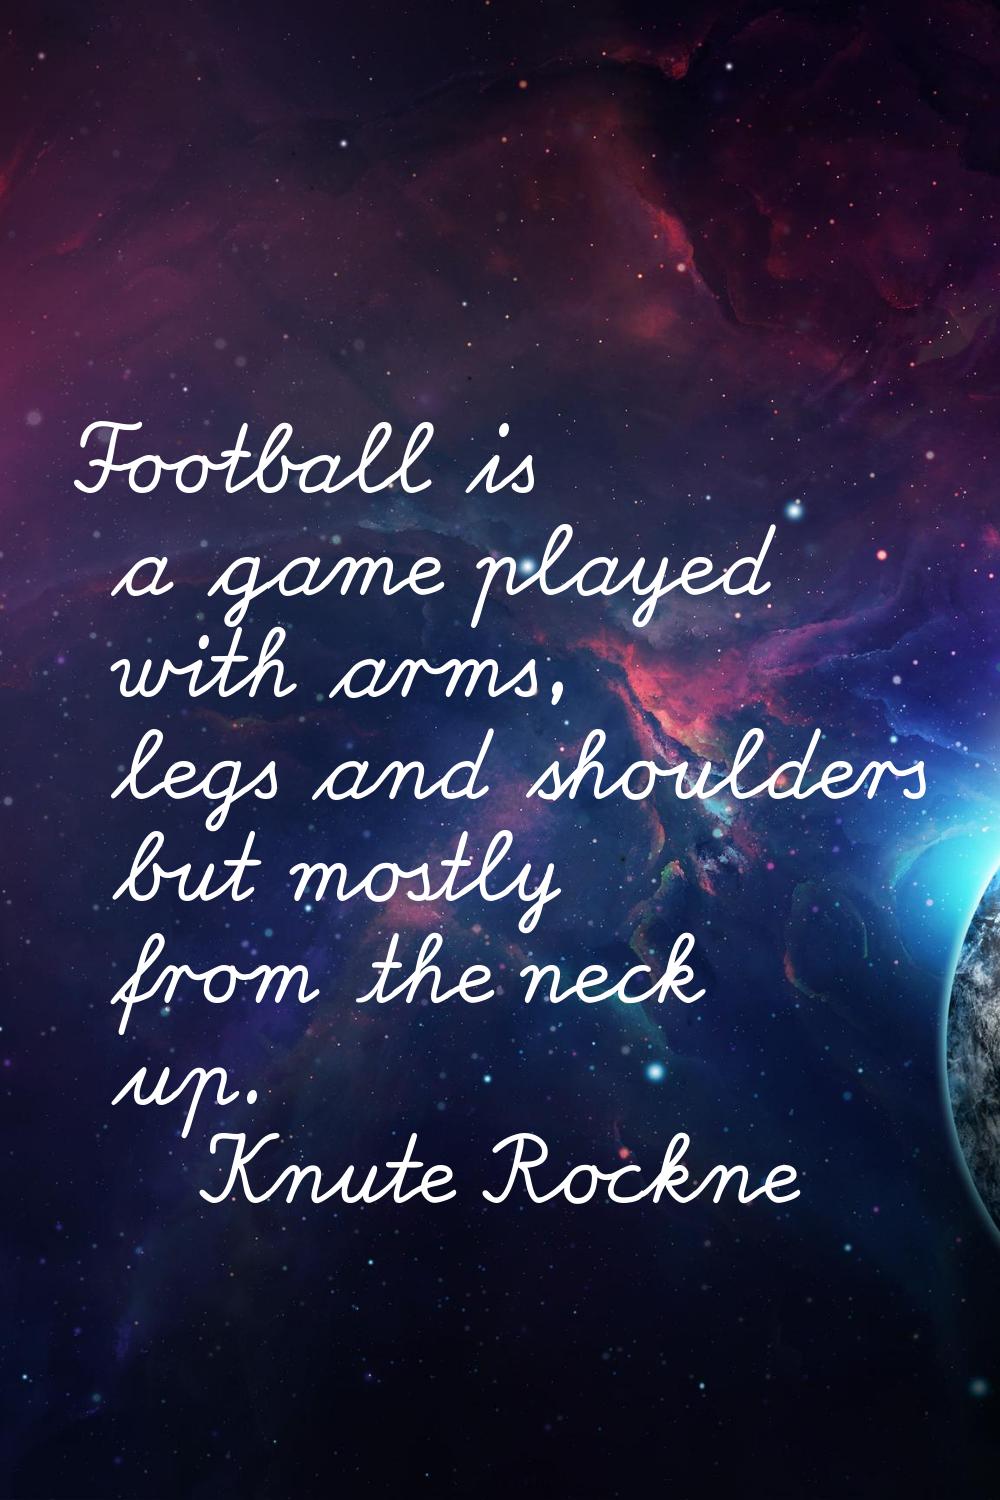 Football is a game played with arms, legs and shoulders but mostly from the neck up.